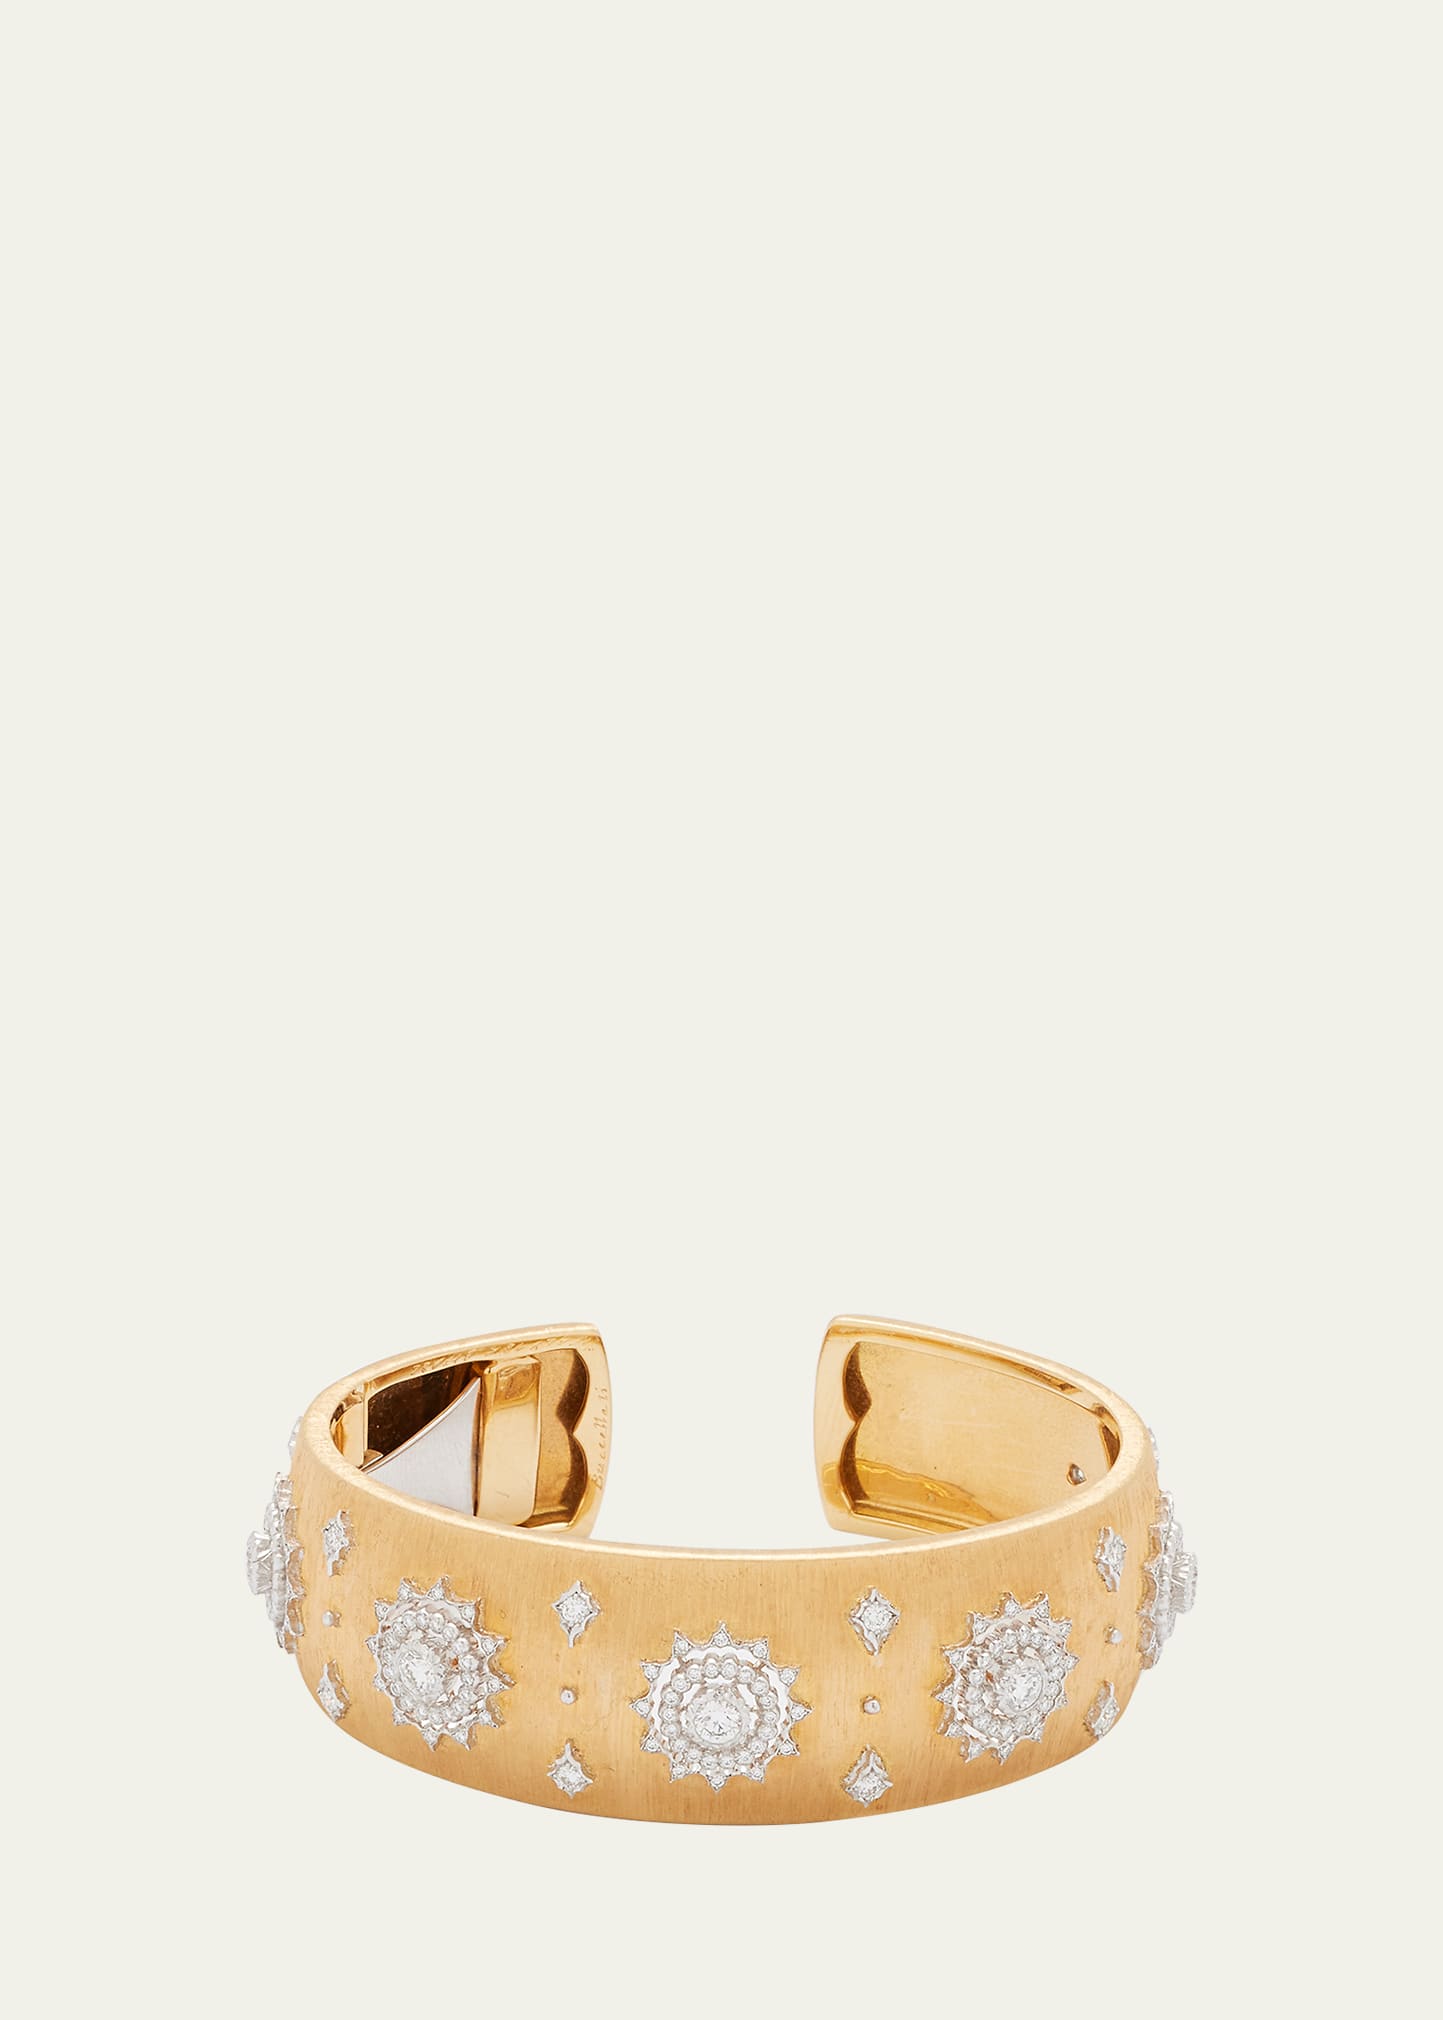 Buccellati Limited Edition Cuff Bracelet in 18K Gold with Diamonds